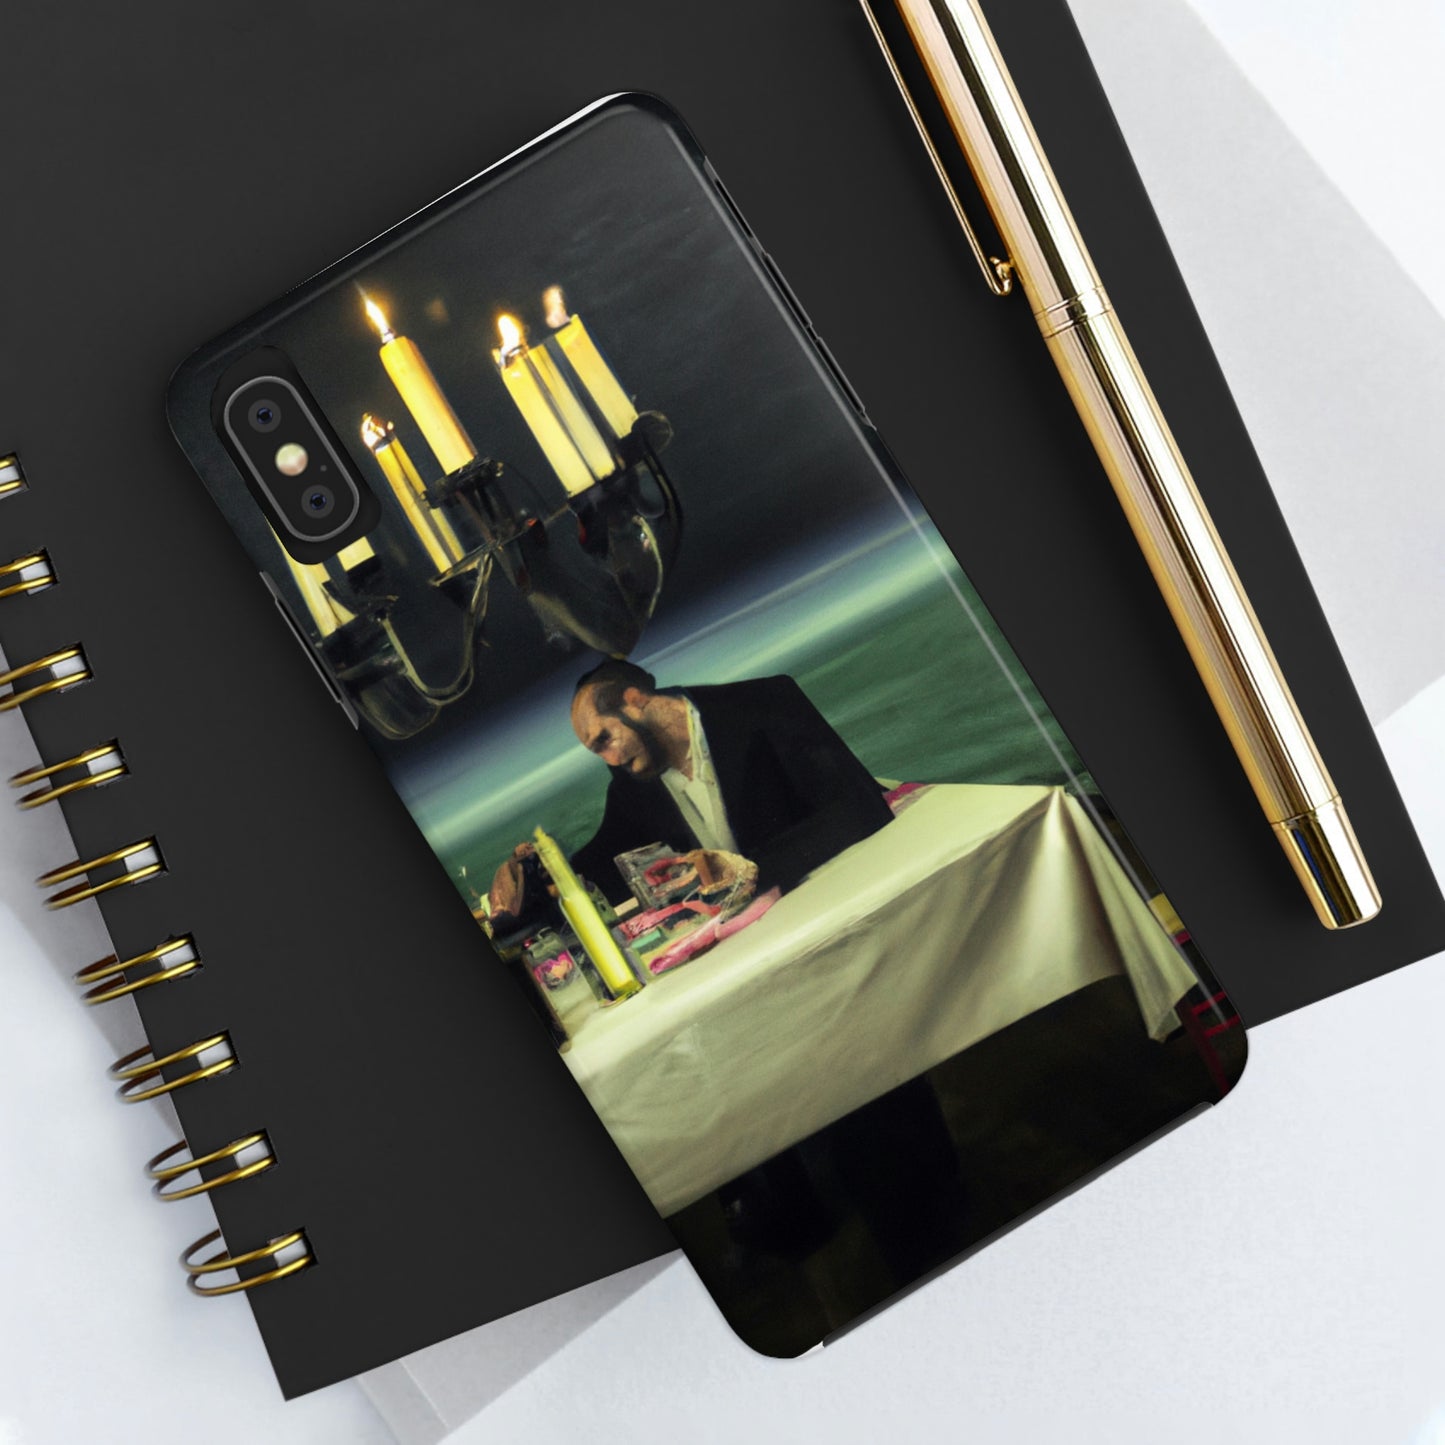 "A Beacon of Romance: An Intimate Candlelit Dinner in a Forgotten Lighthouse" - The Alien Tough Phone Cases